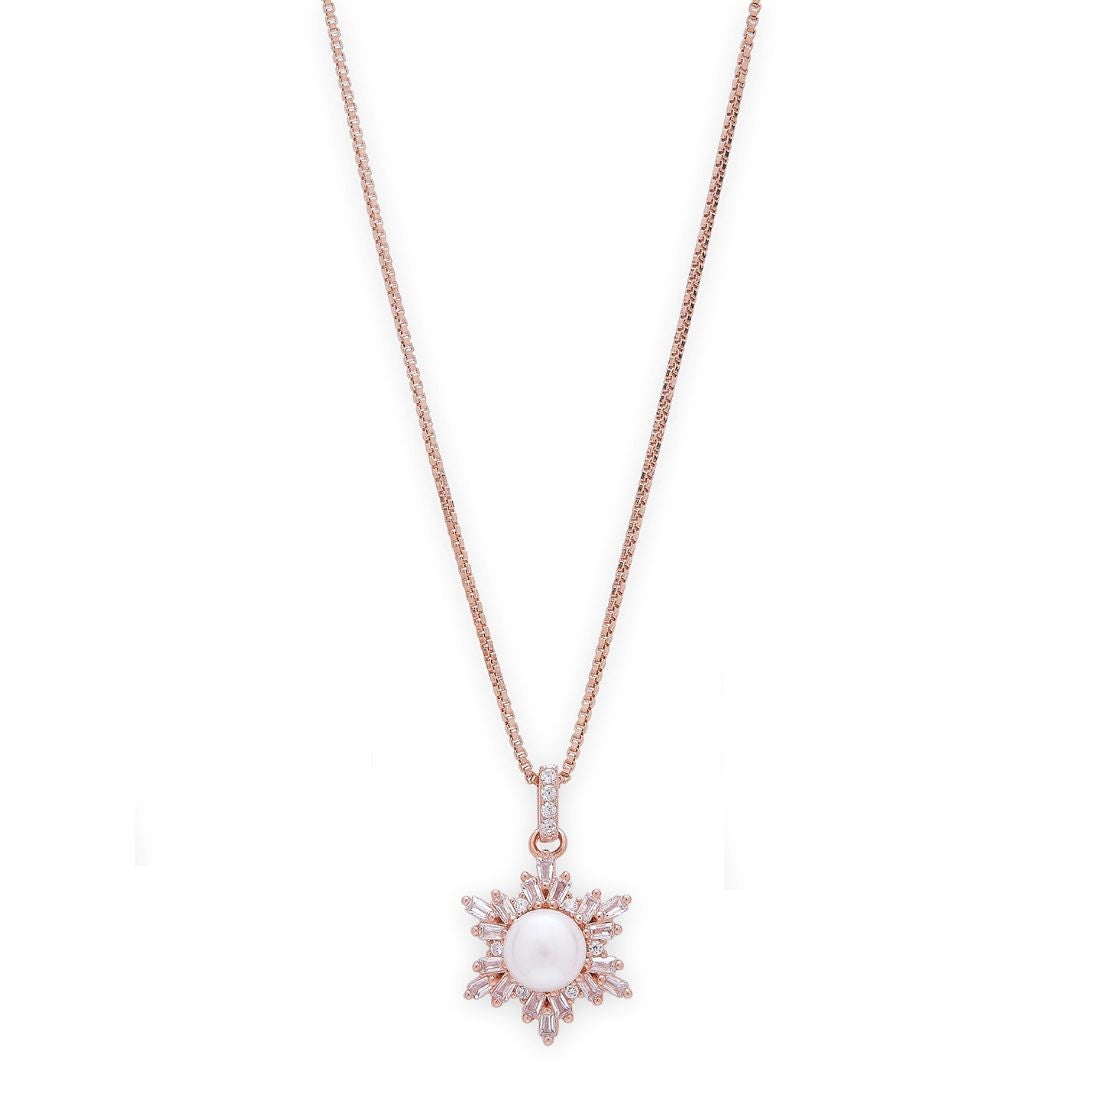 Blooming Beauty 925 Sterling Silver Rose Gold-Plated Flower Pendant with Chain